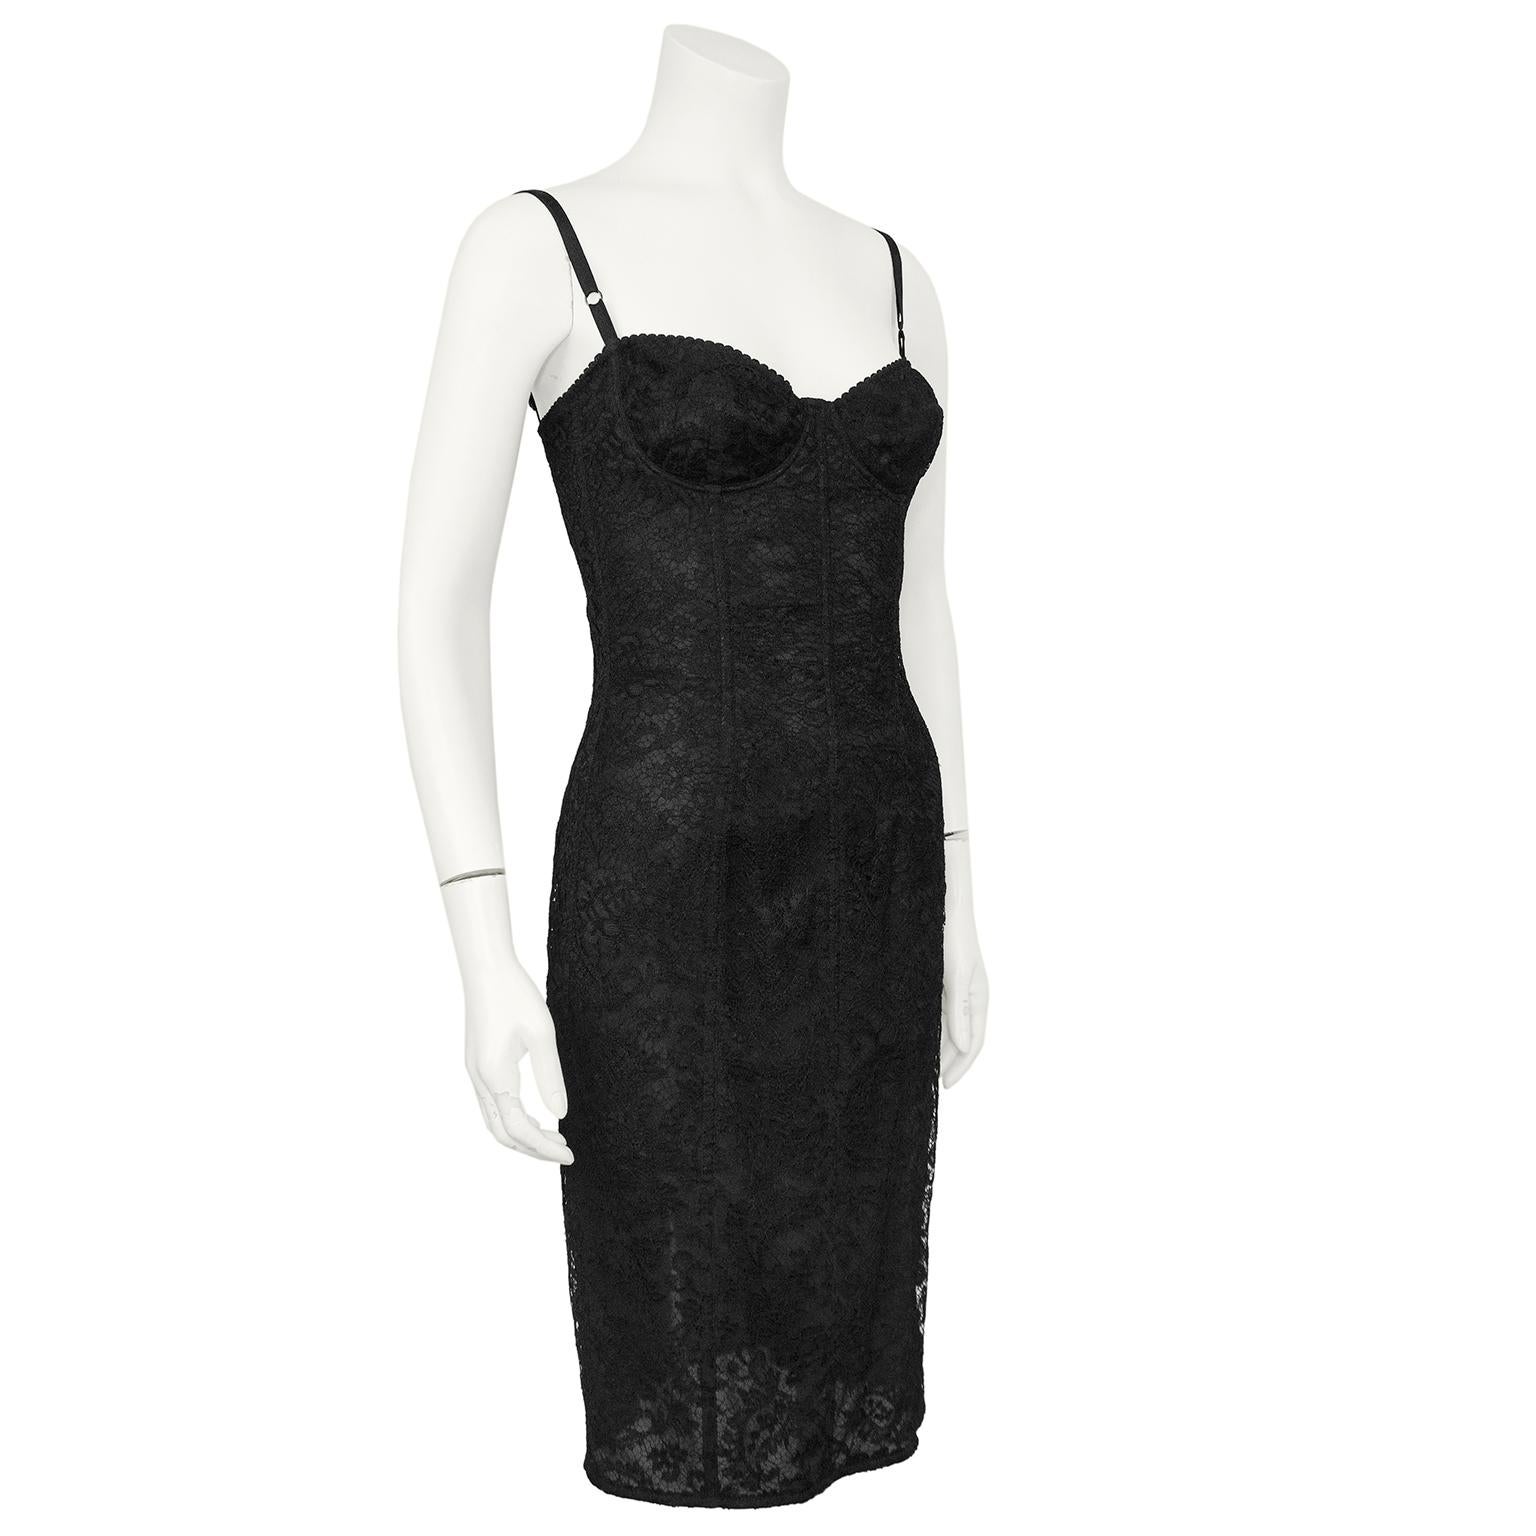 Very sexy and quintessentially Dolce & Gabbana dress from the earl 2000s. Beautiful black lace with a boned bustier bodice. Adjustable spaghetti straps and underwire cups. Length hits just above the knee with a small slit at the centre back seam.